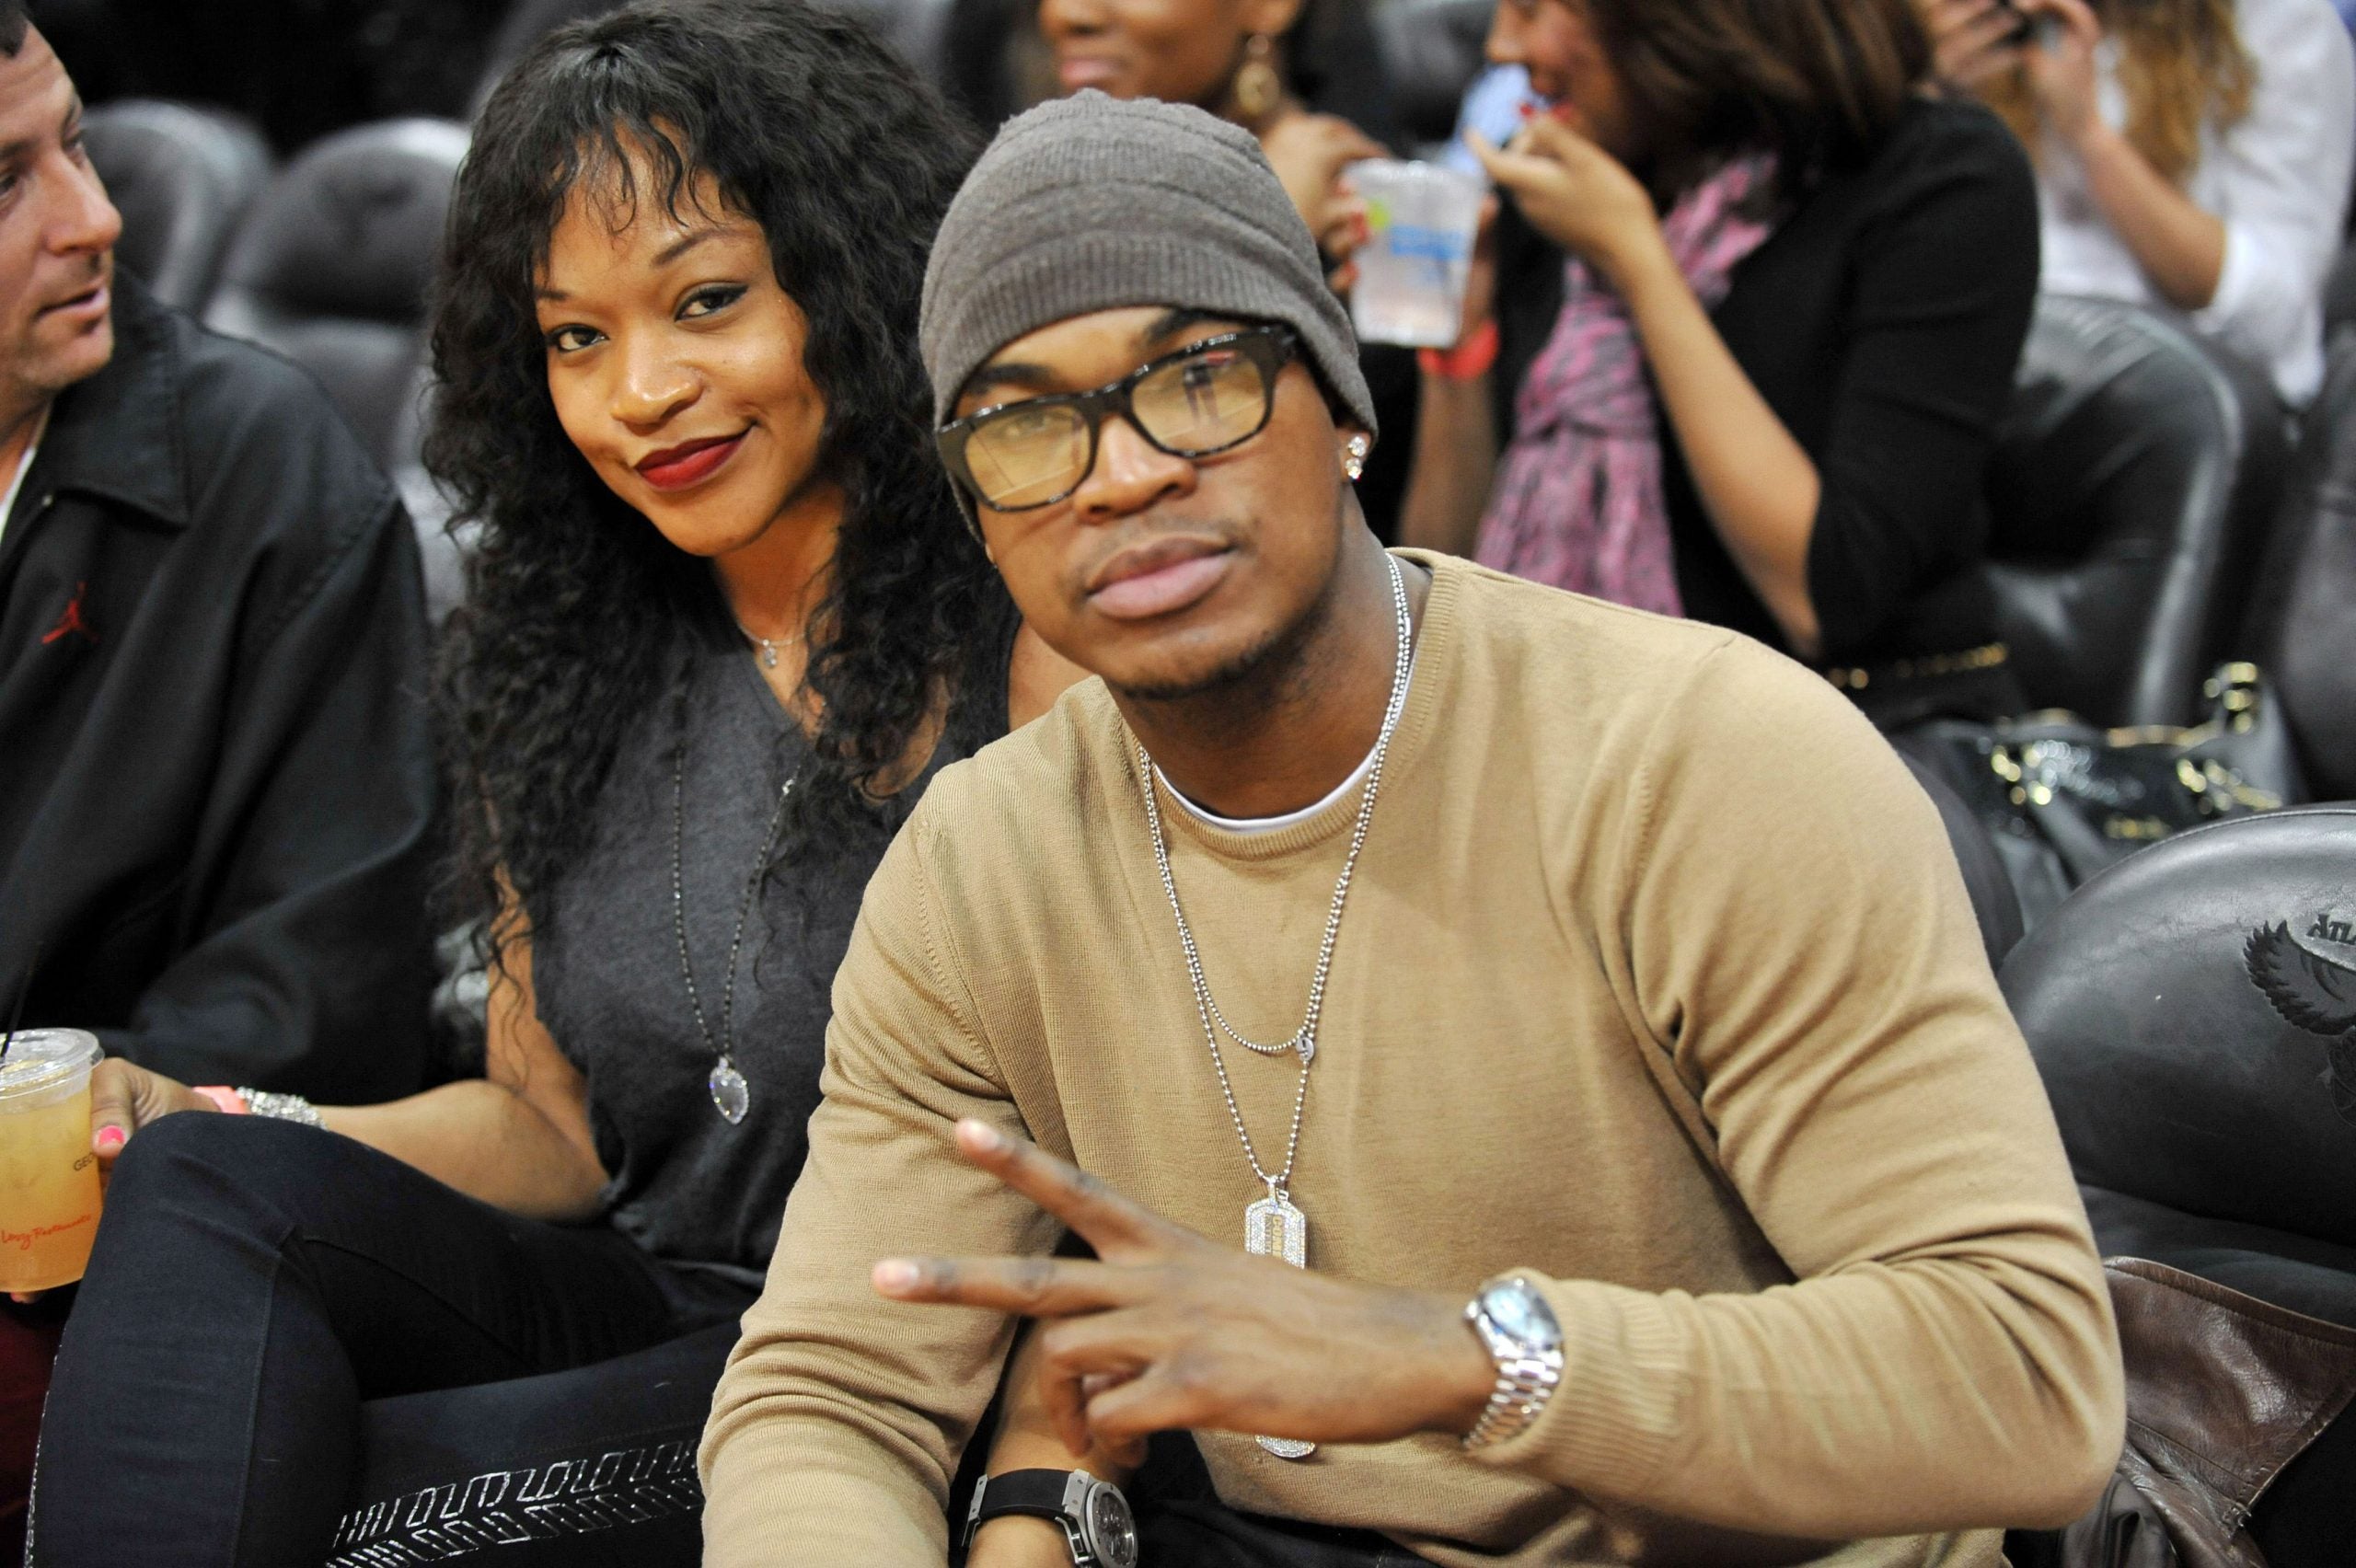 A Married Monyetta Shaw Receives Backlash For Revealing That Engagement To Ne-Yo Ended Over His Demand For Threesomes